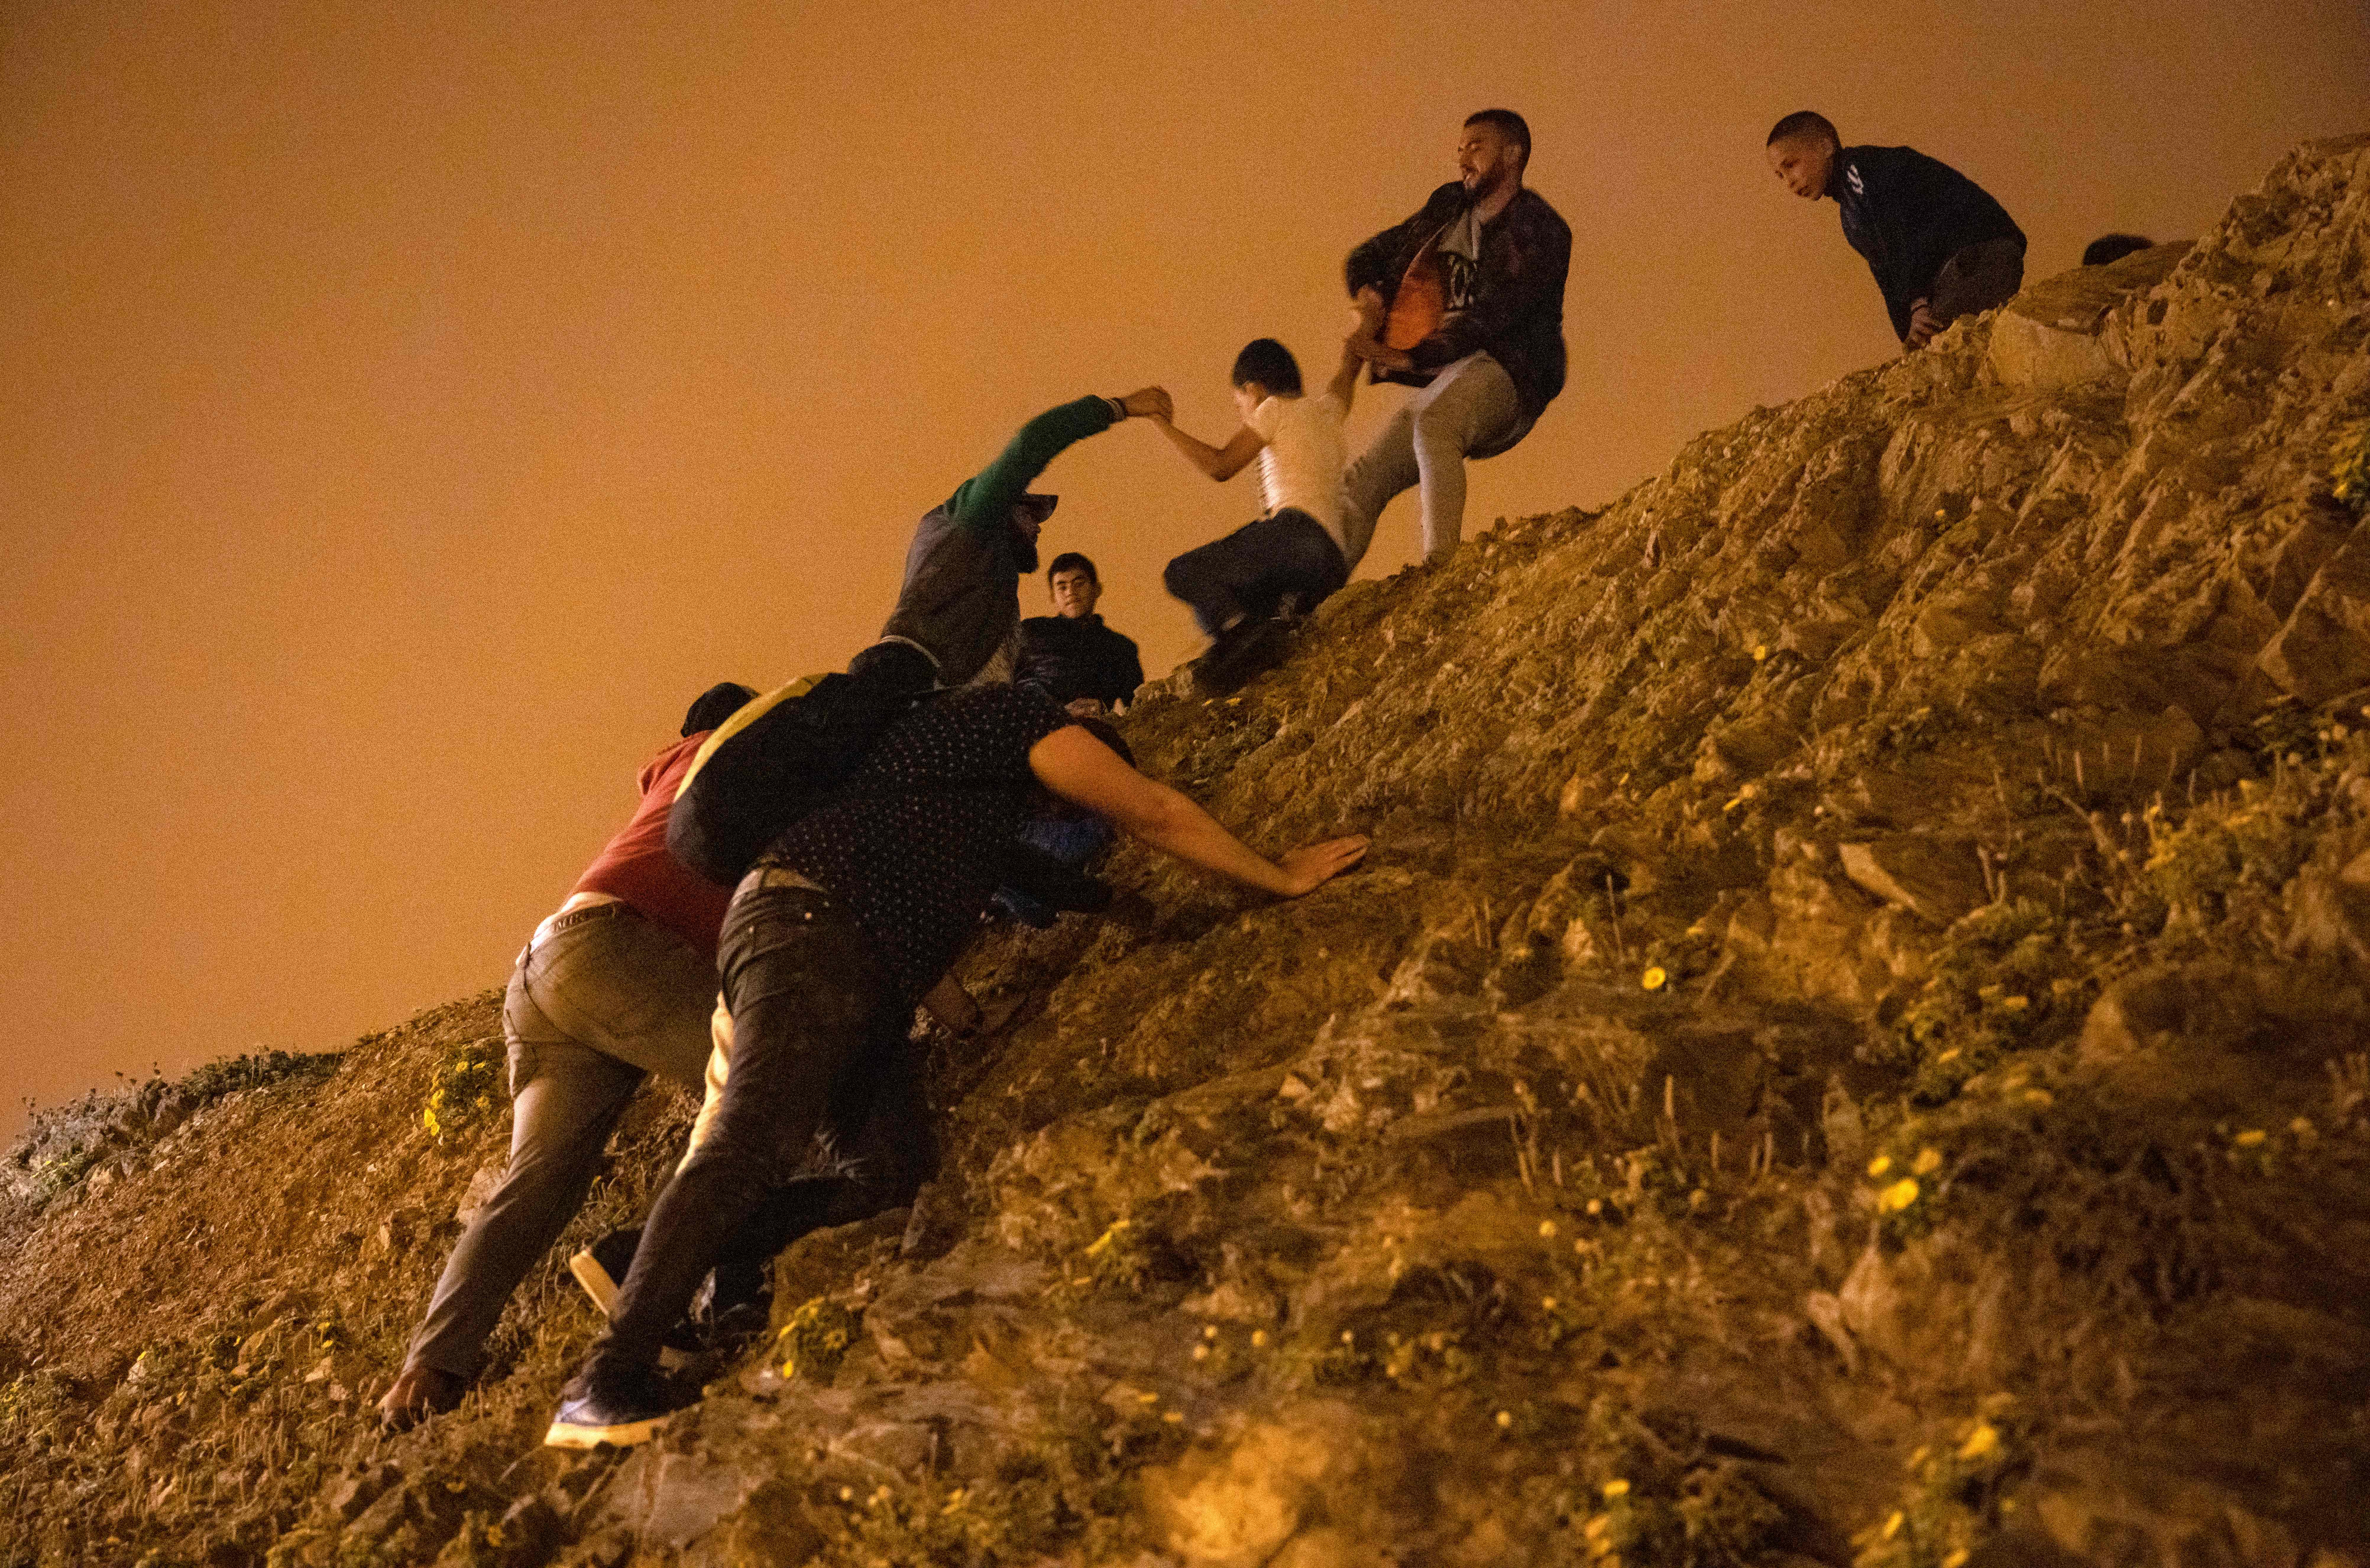 Moroccan migrants climb a rocky cliffside as they attempt to cross the border and reach Ceuta. Photo: FADEL SENNA/AFP via Getty Images